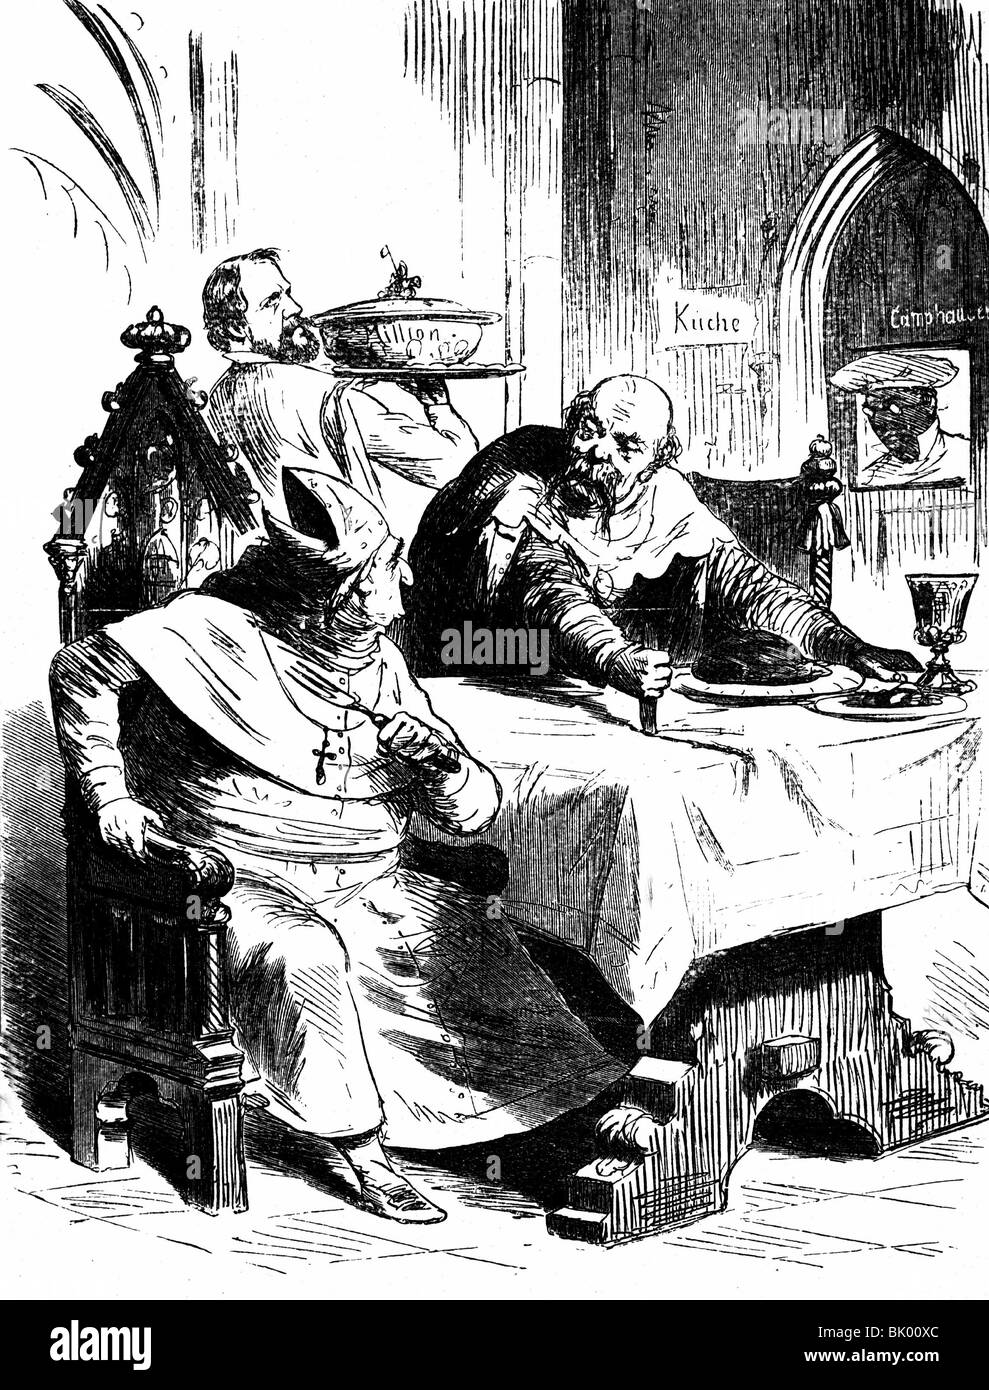 geography / travel, Germany, politics, 'culture struggle', caricature, 'Das Tischtuch wird zerschnitten' (The tablecloth will be cut up), Otto von Bismarck, Pope Pius IX, drawing from 'Berliner Wespen', 1876, Stock Photo